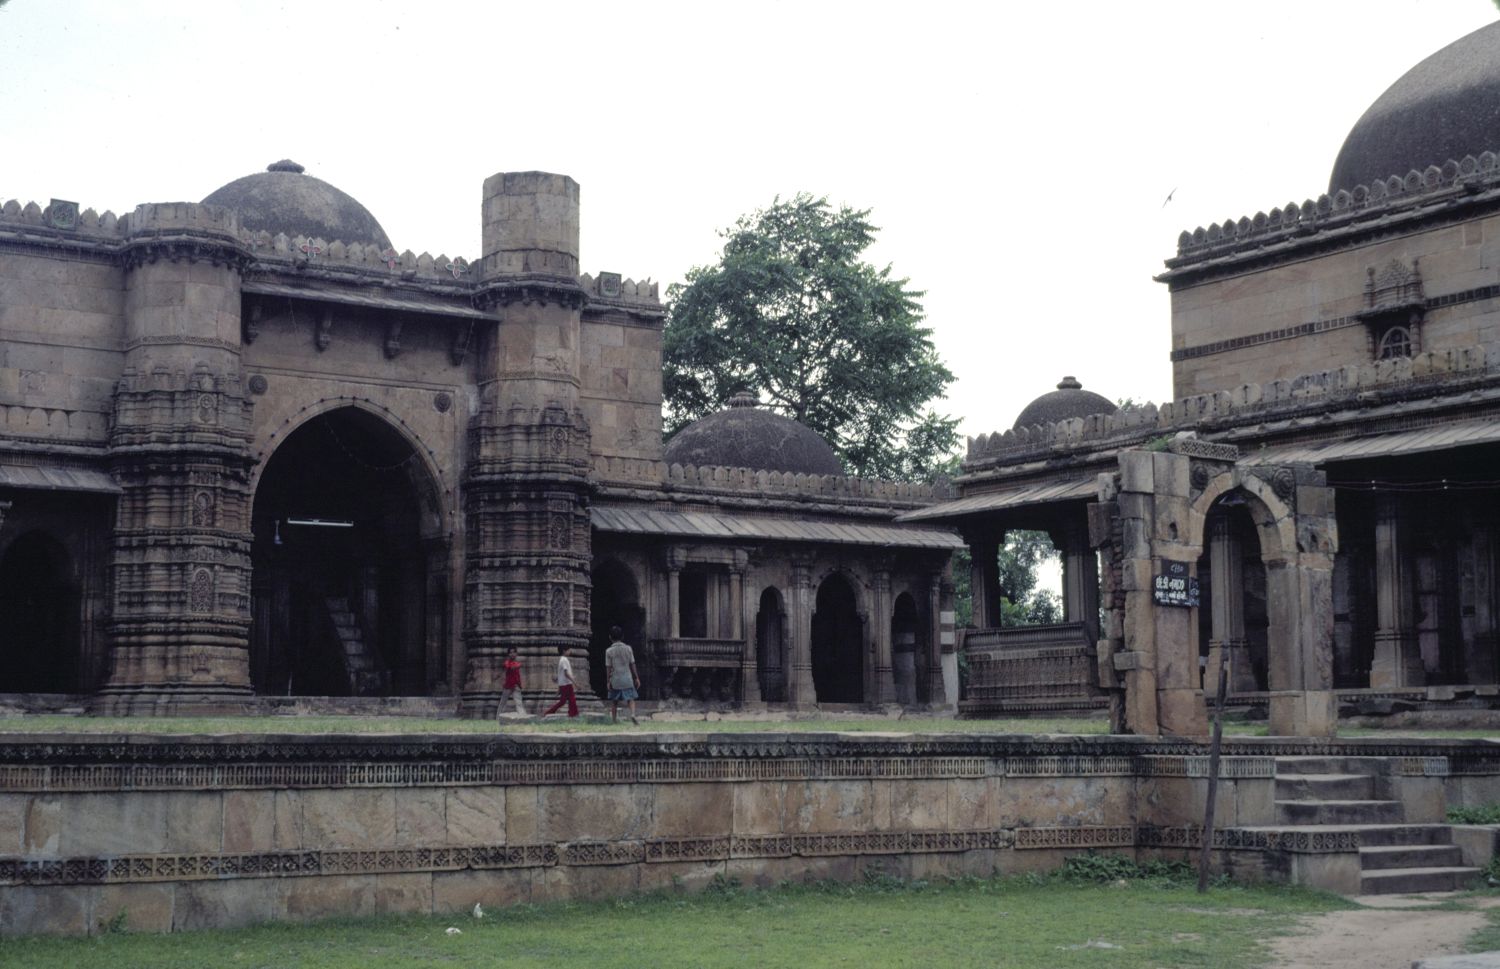 Exterior view of mosque and tomb from east.